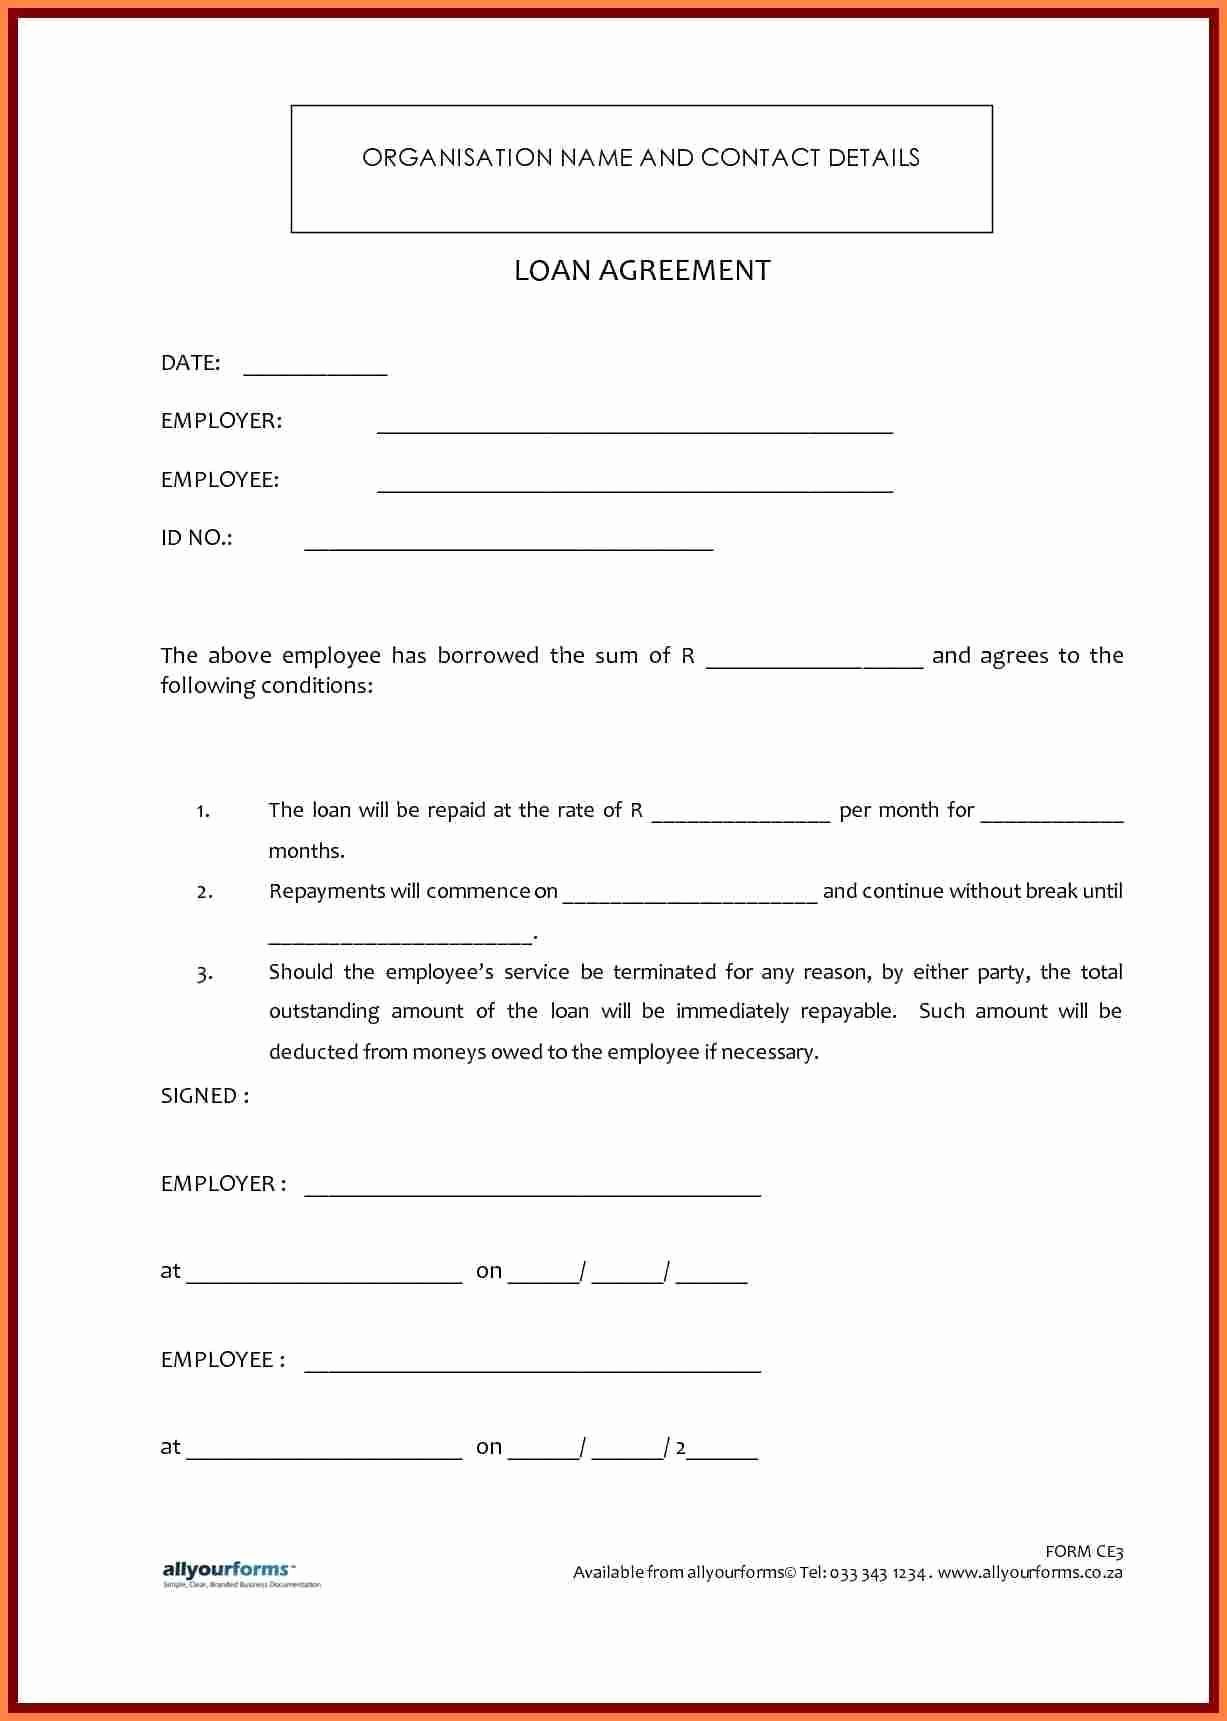 Family Loan Agreement Template Free Unique 41 Last Sample Personal Loan Agreement Between Family Ga